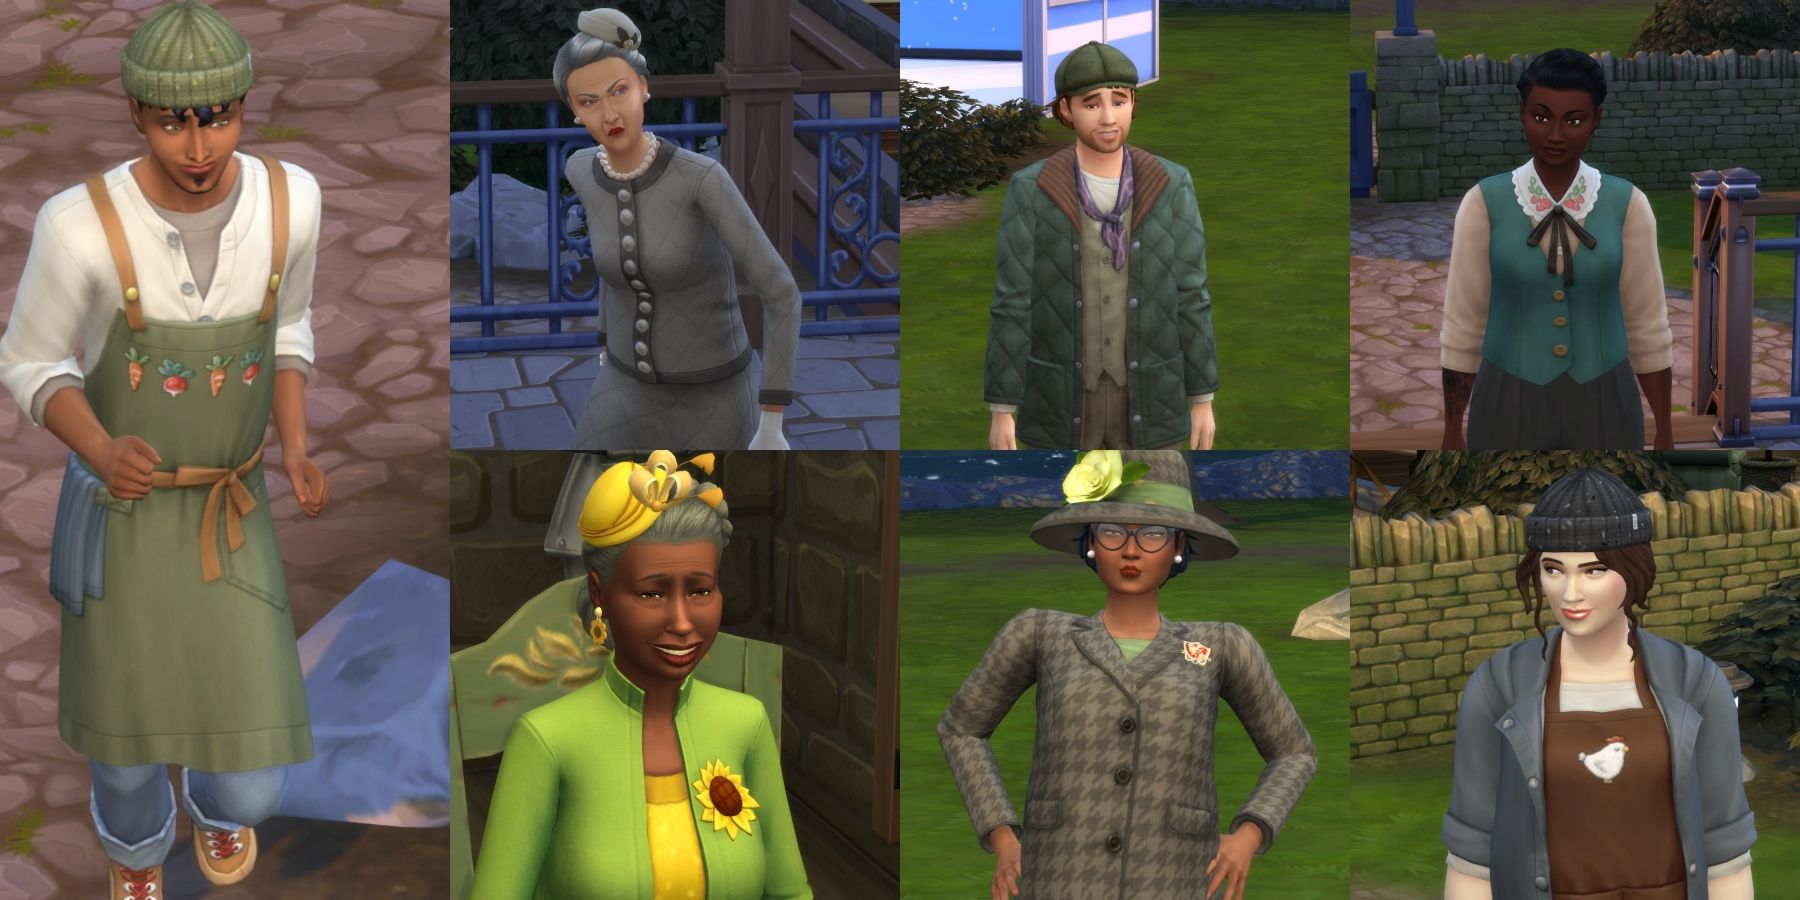 the seven villagers who can give errands in the Sims 4 Cottage Living